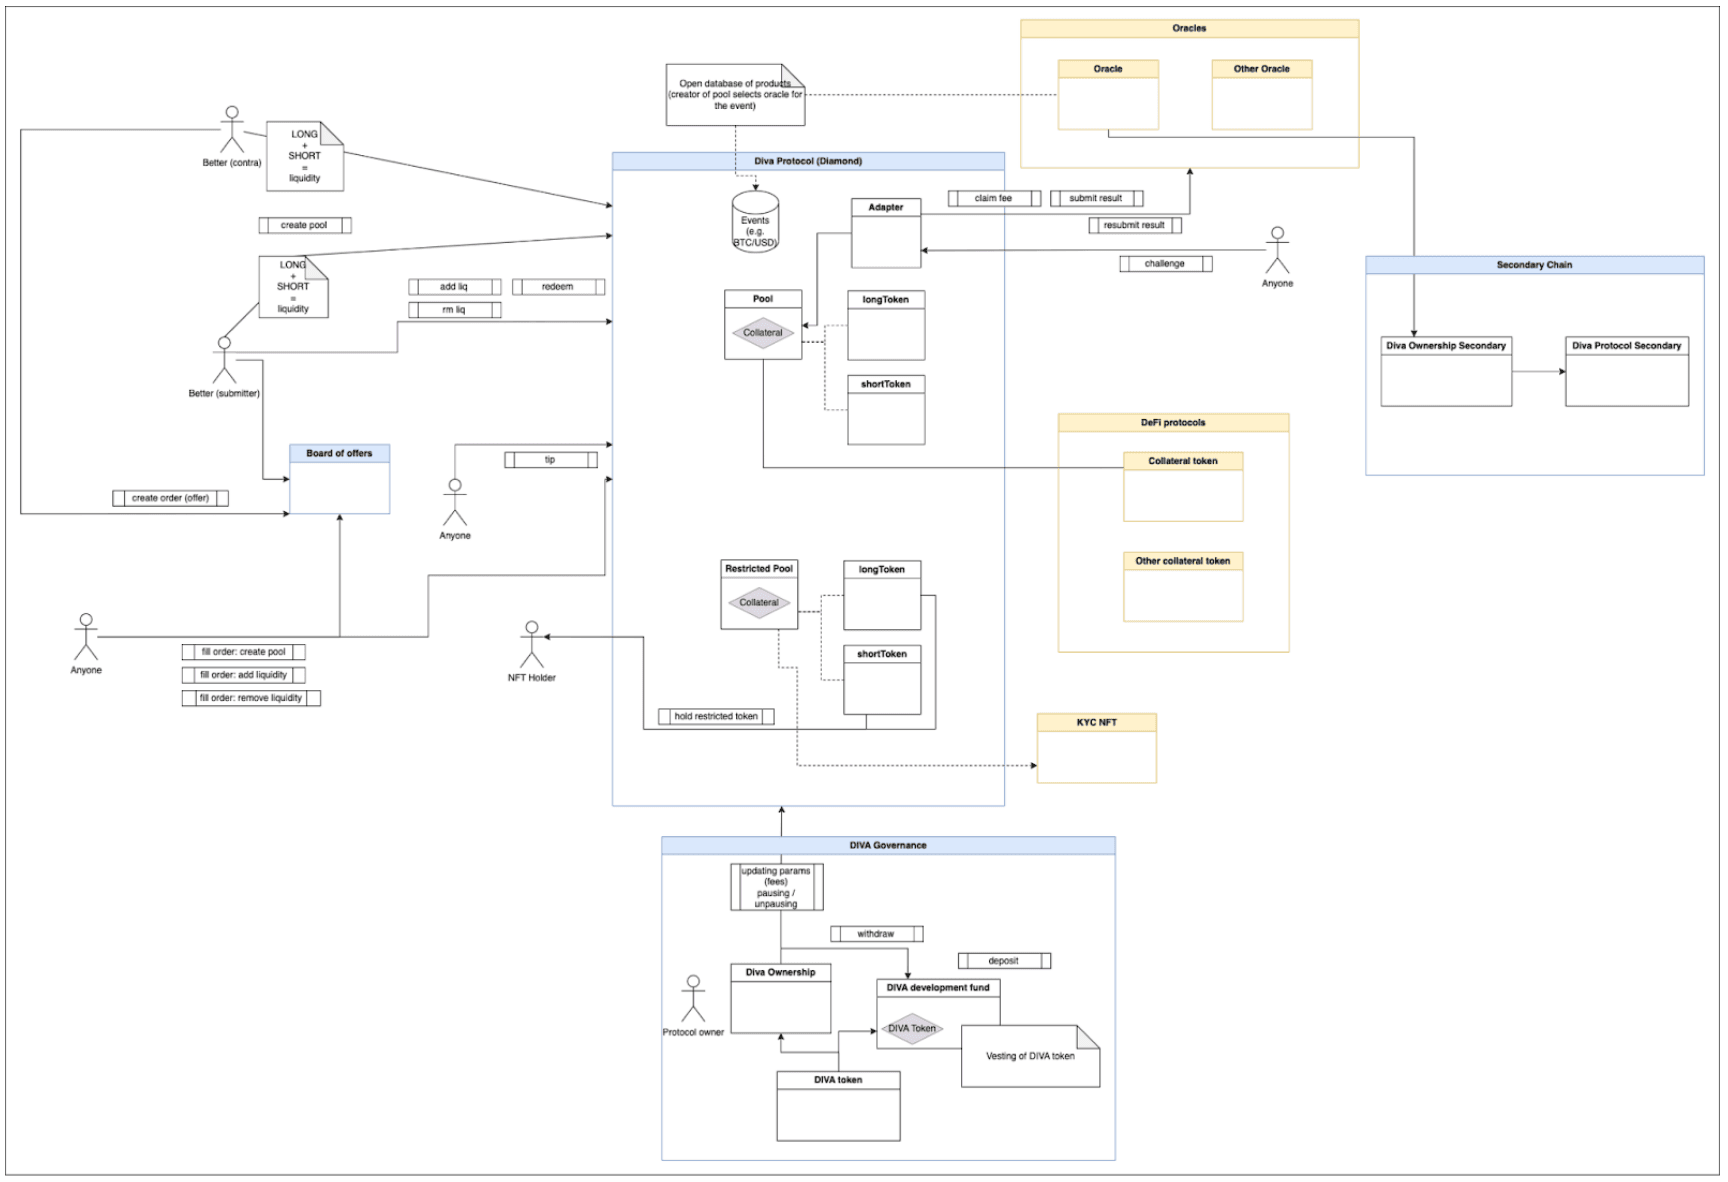 Threat modeling diagram example